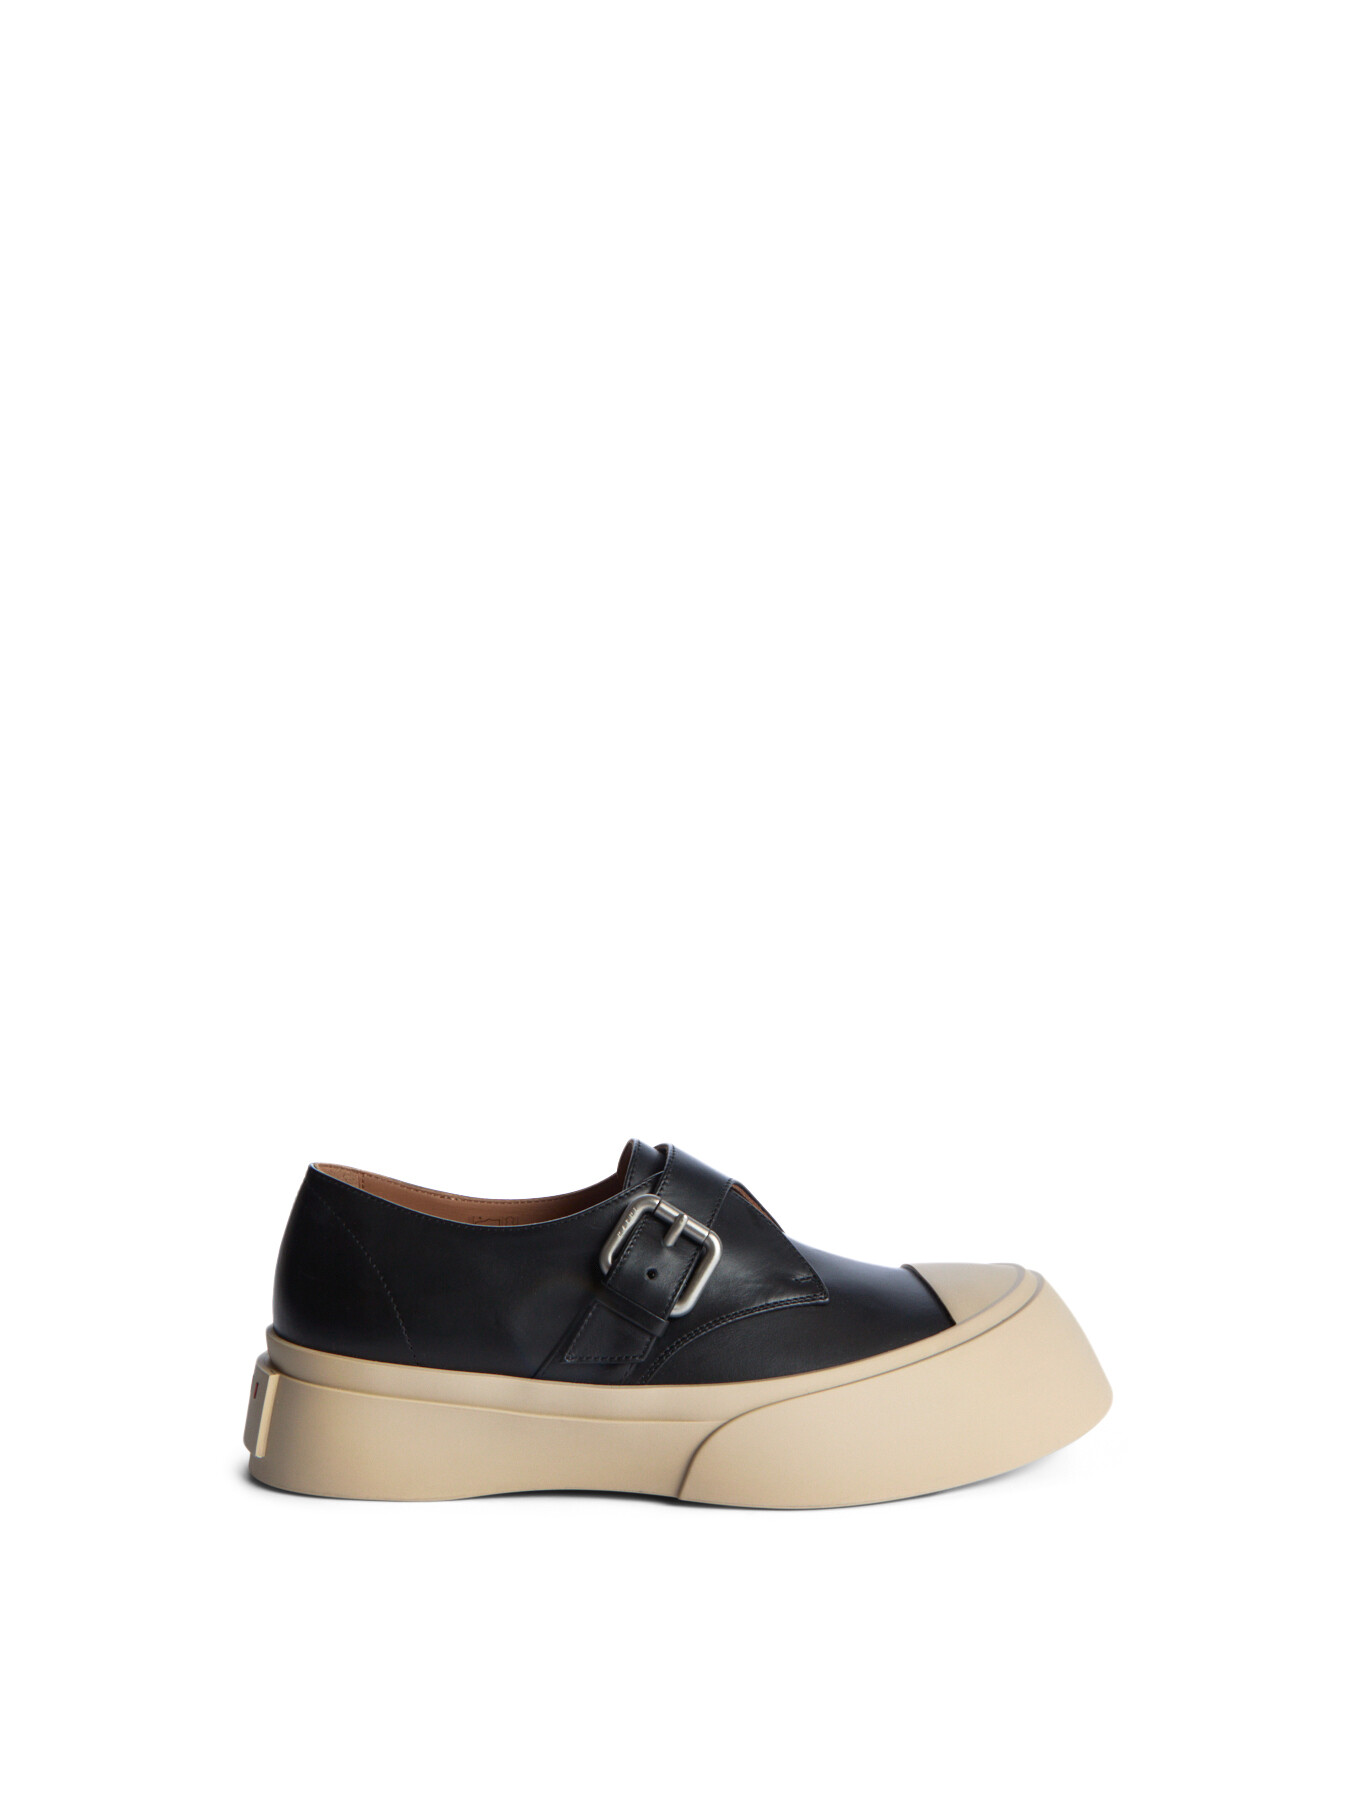 Marni Men's Buckle Shoes In Black